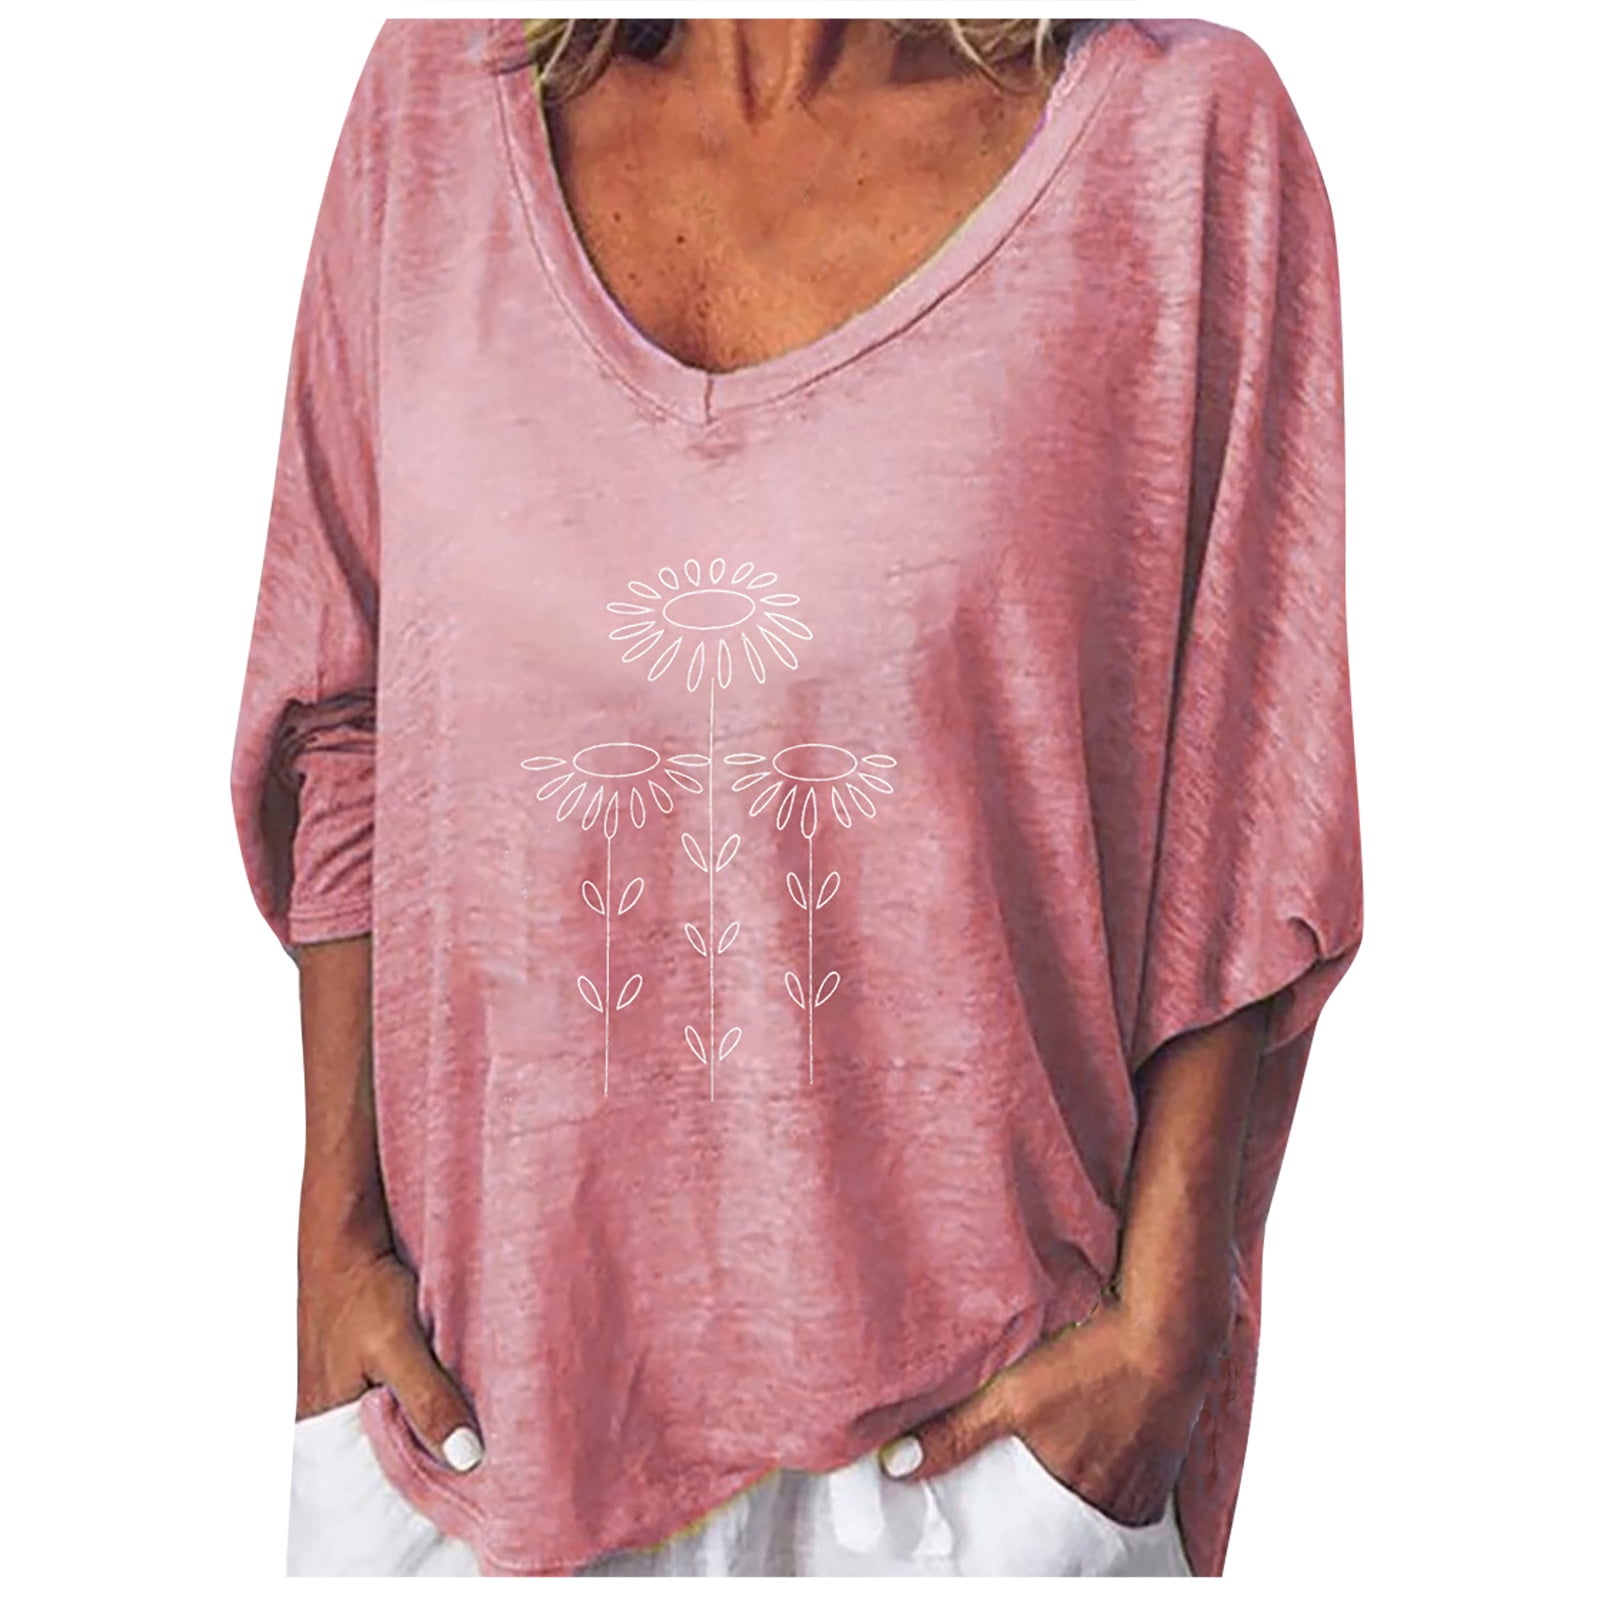 Dressy Tunic Tops to Wear with Leggings V-Neck Dandelion Graphic